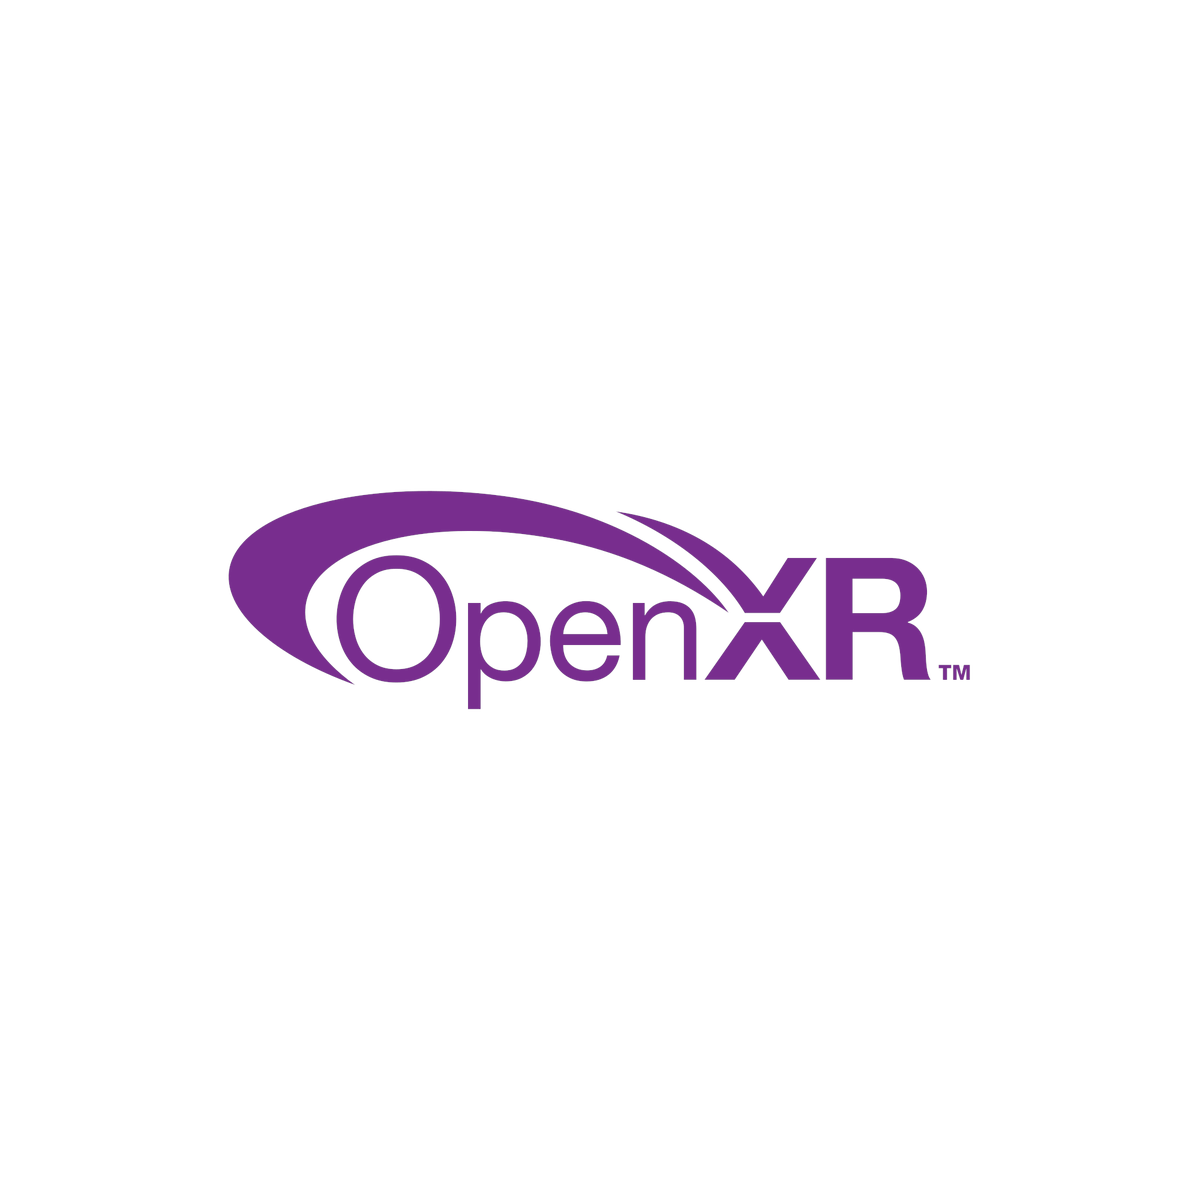 Said I was done but here's another OpenXR tutorial
This one's for everyone who's ever wondered how to add a desktop window to their application so people can see what's going on inside the headset!
amini-allight.org/post/openxr-tu…
#vr